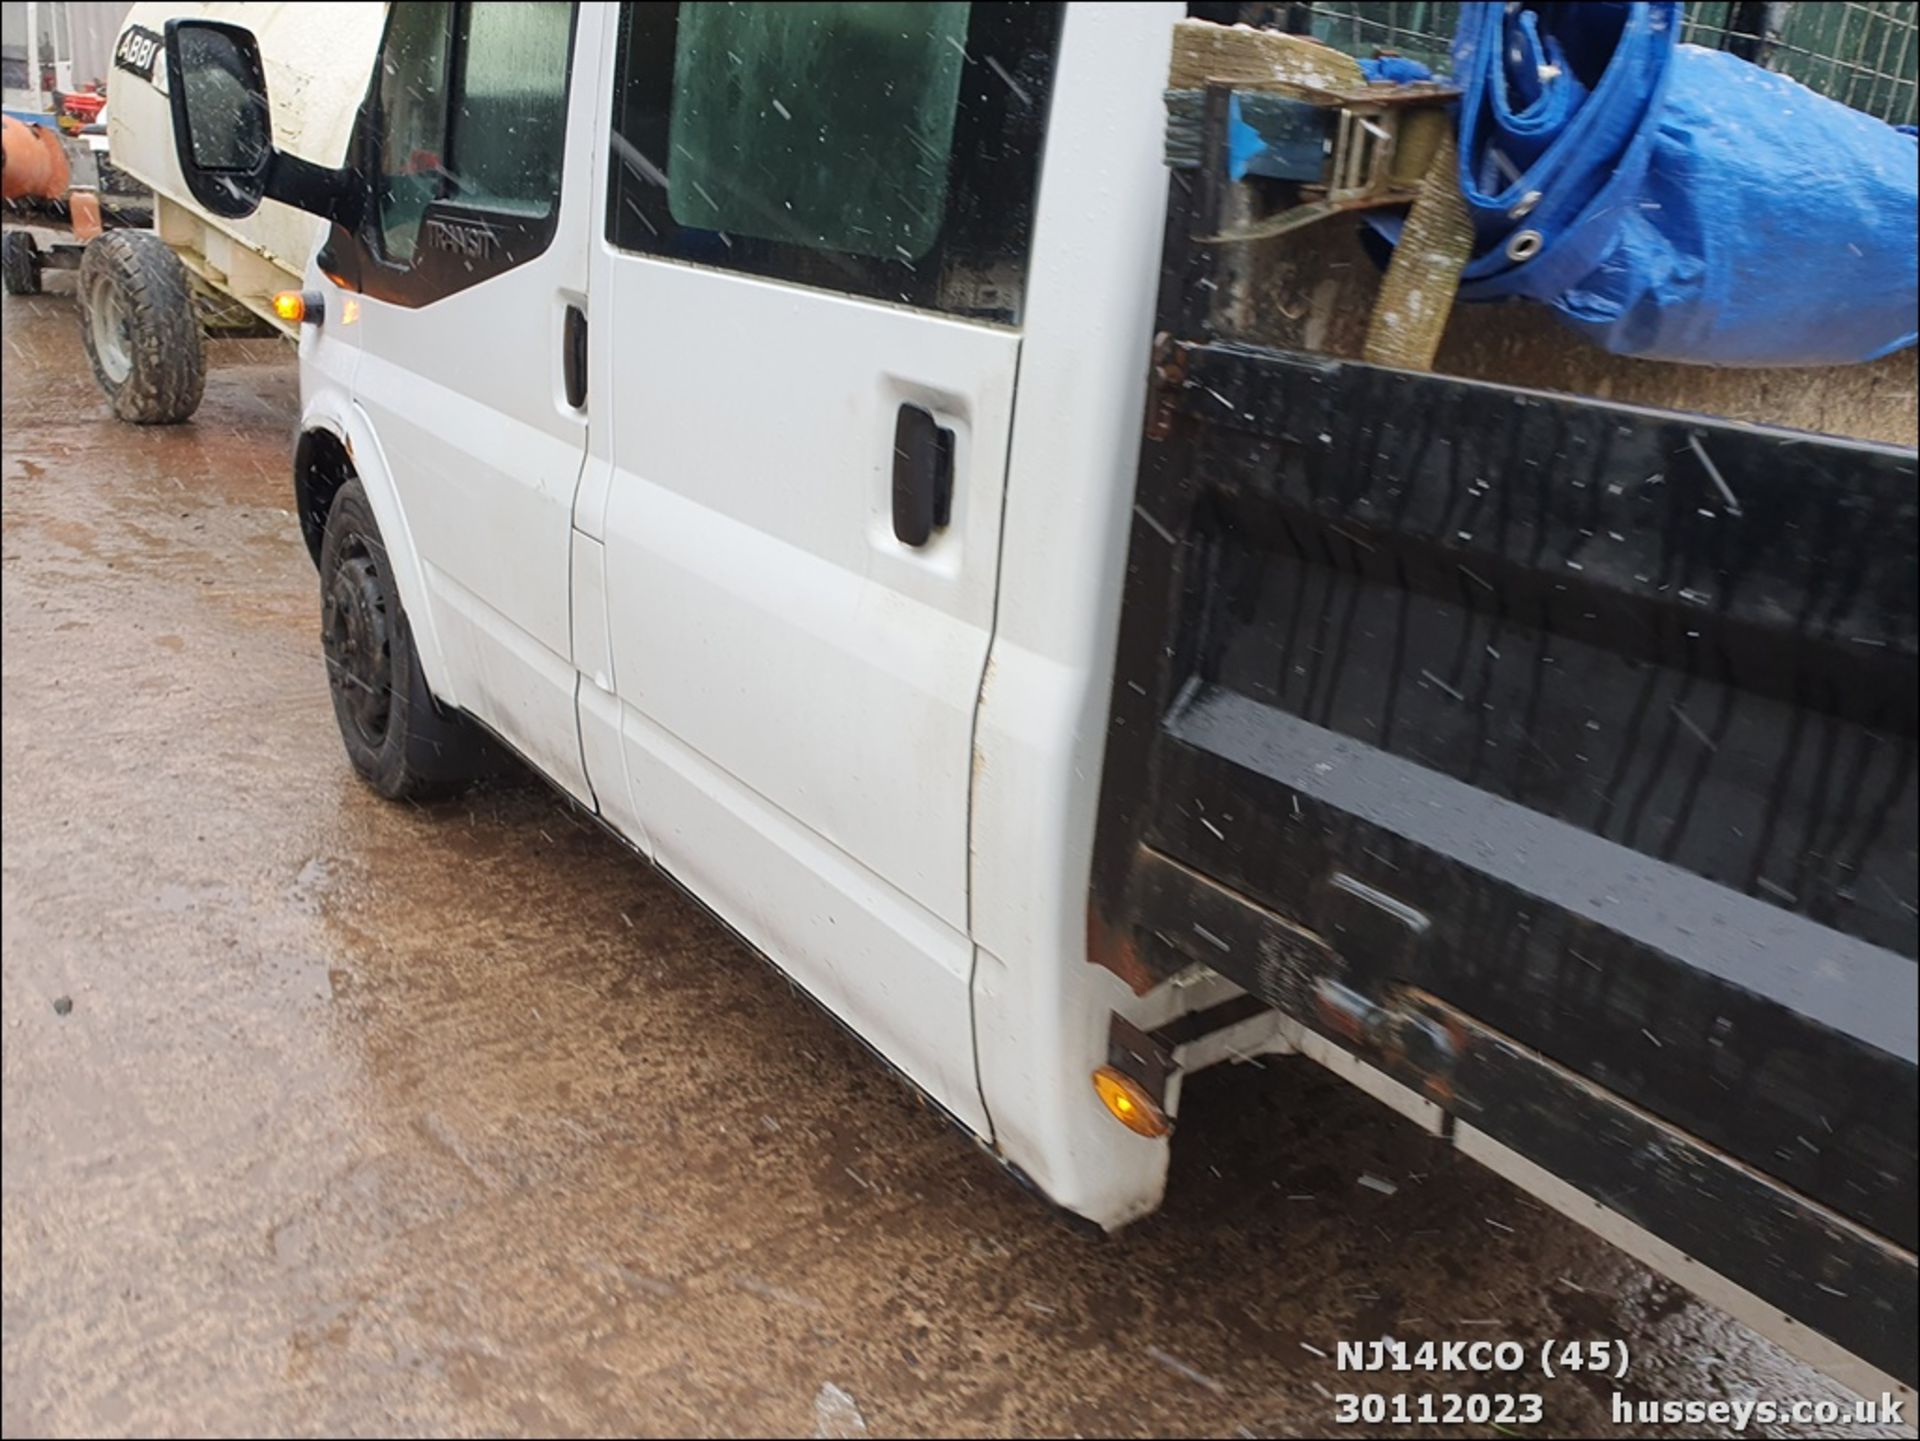 14/14 FORD TRANSIT 100 T350 RWD - 2198cc 4dr Tipper (White, 75k) - Image 46 of 51